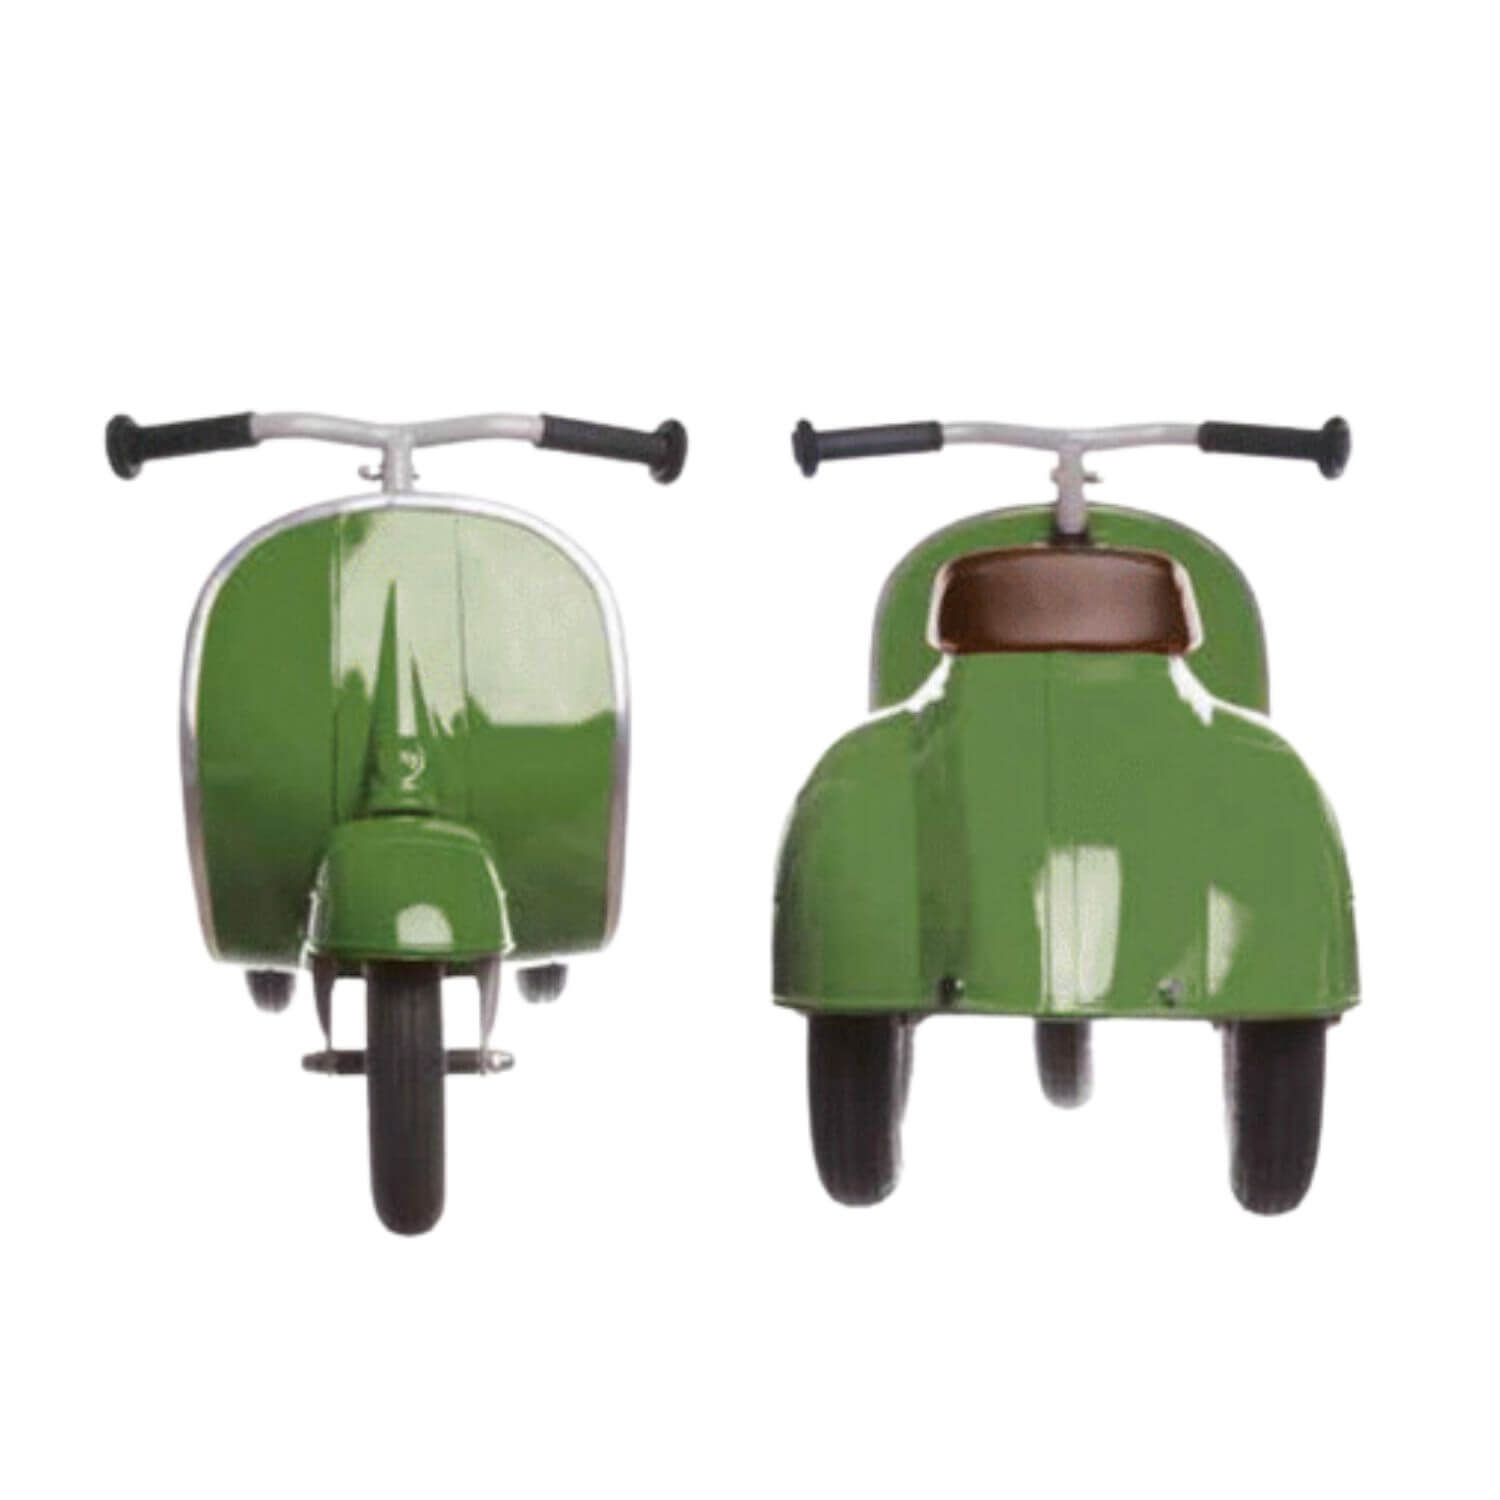 Primo Sierra Ride-On & Brown Seat Scooter Green